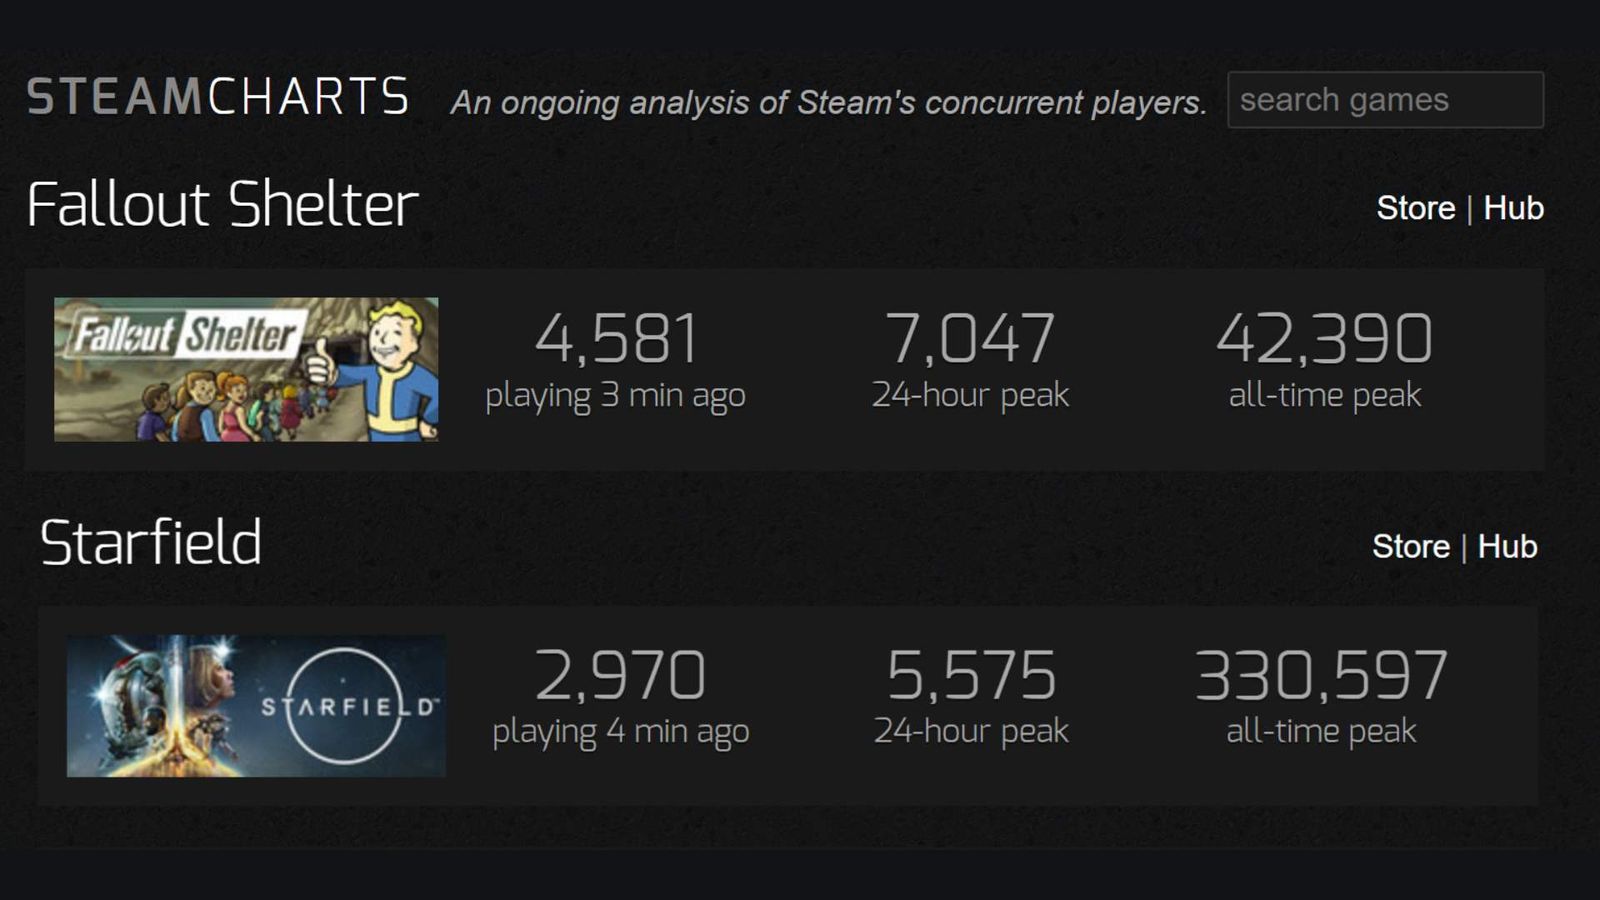 Steam Charts stats showing Fallout Shelter and Starfield Player Numbers